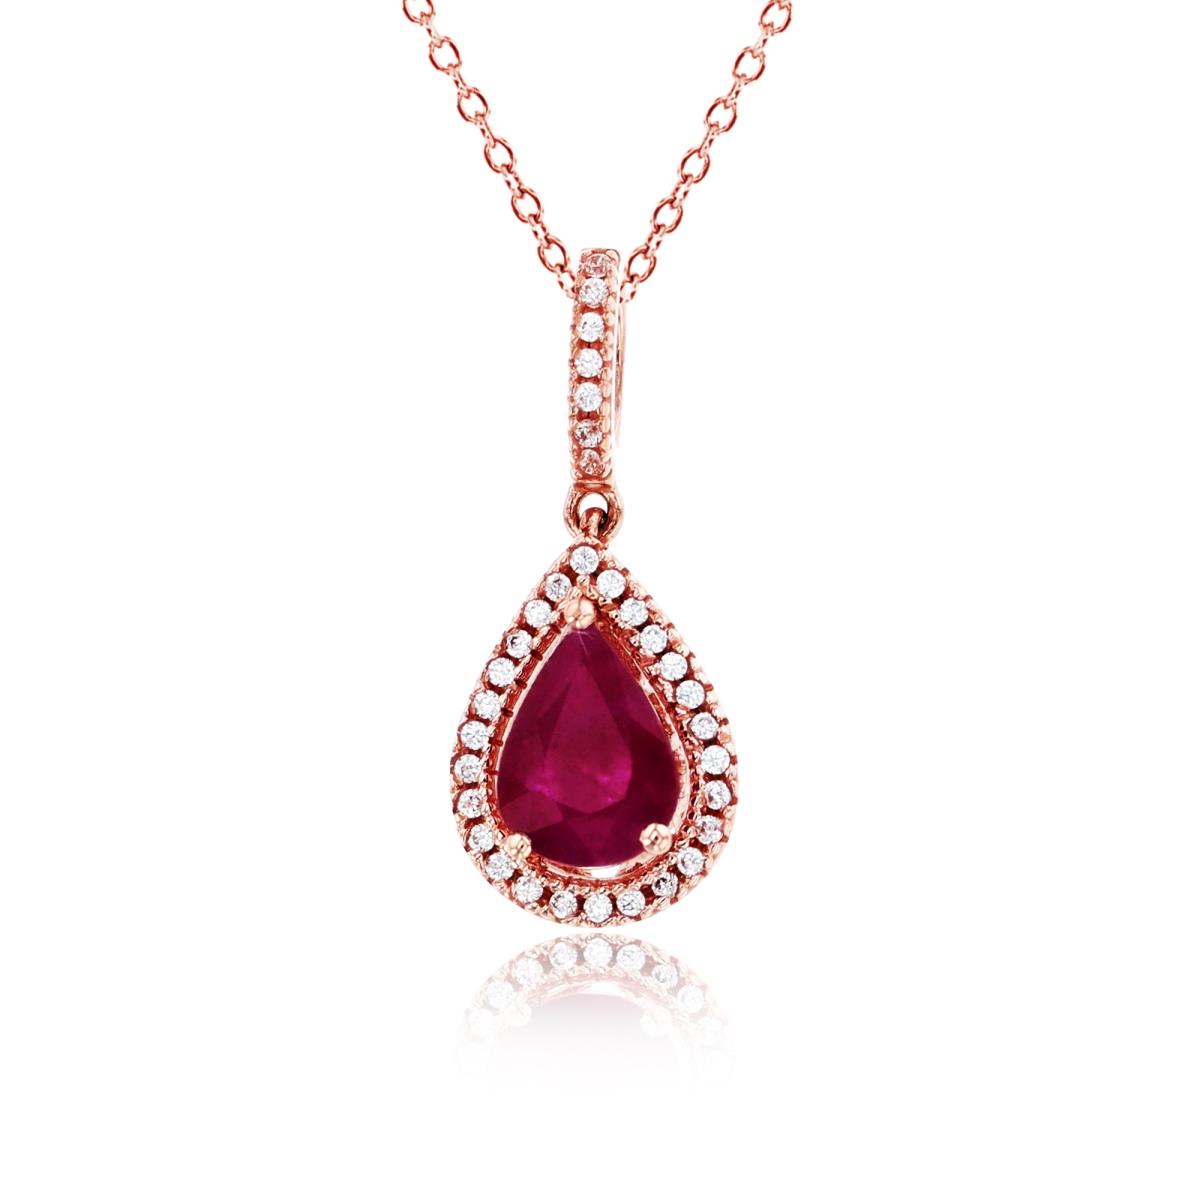 10K Rose Gold 0.10cttw Rnd Diamonds & 7x5mm PS Glass Field Ruby Halo 18"Necklace